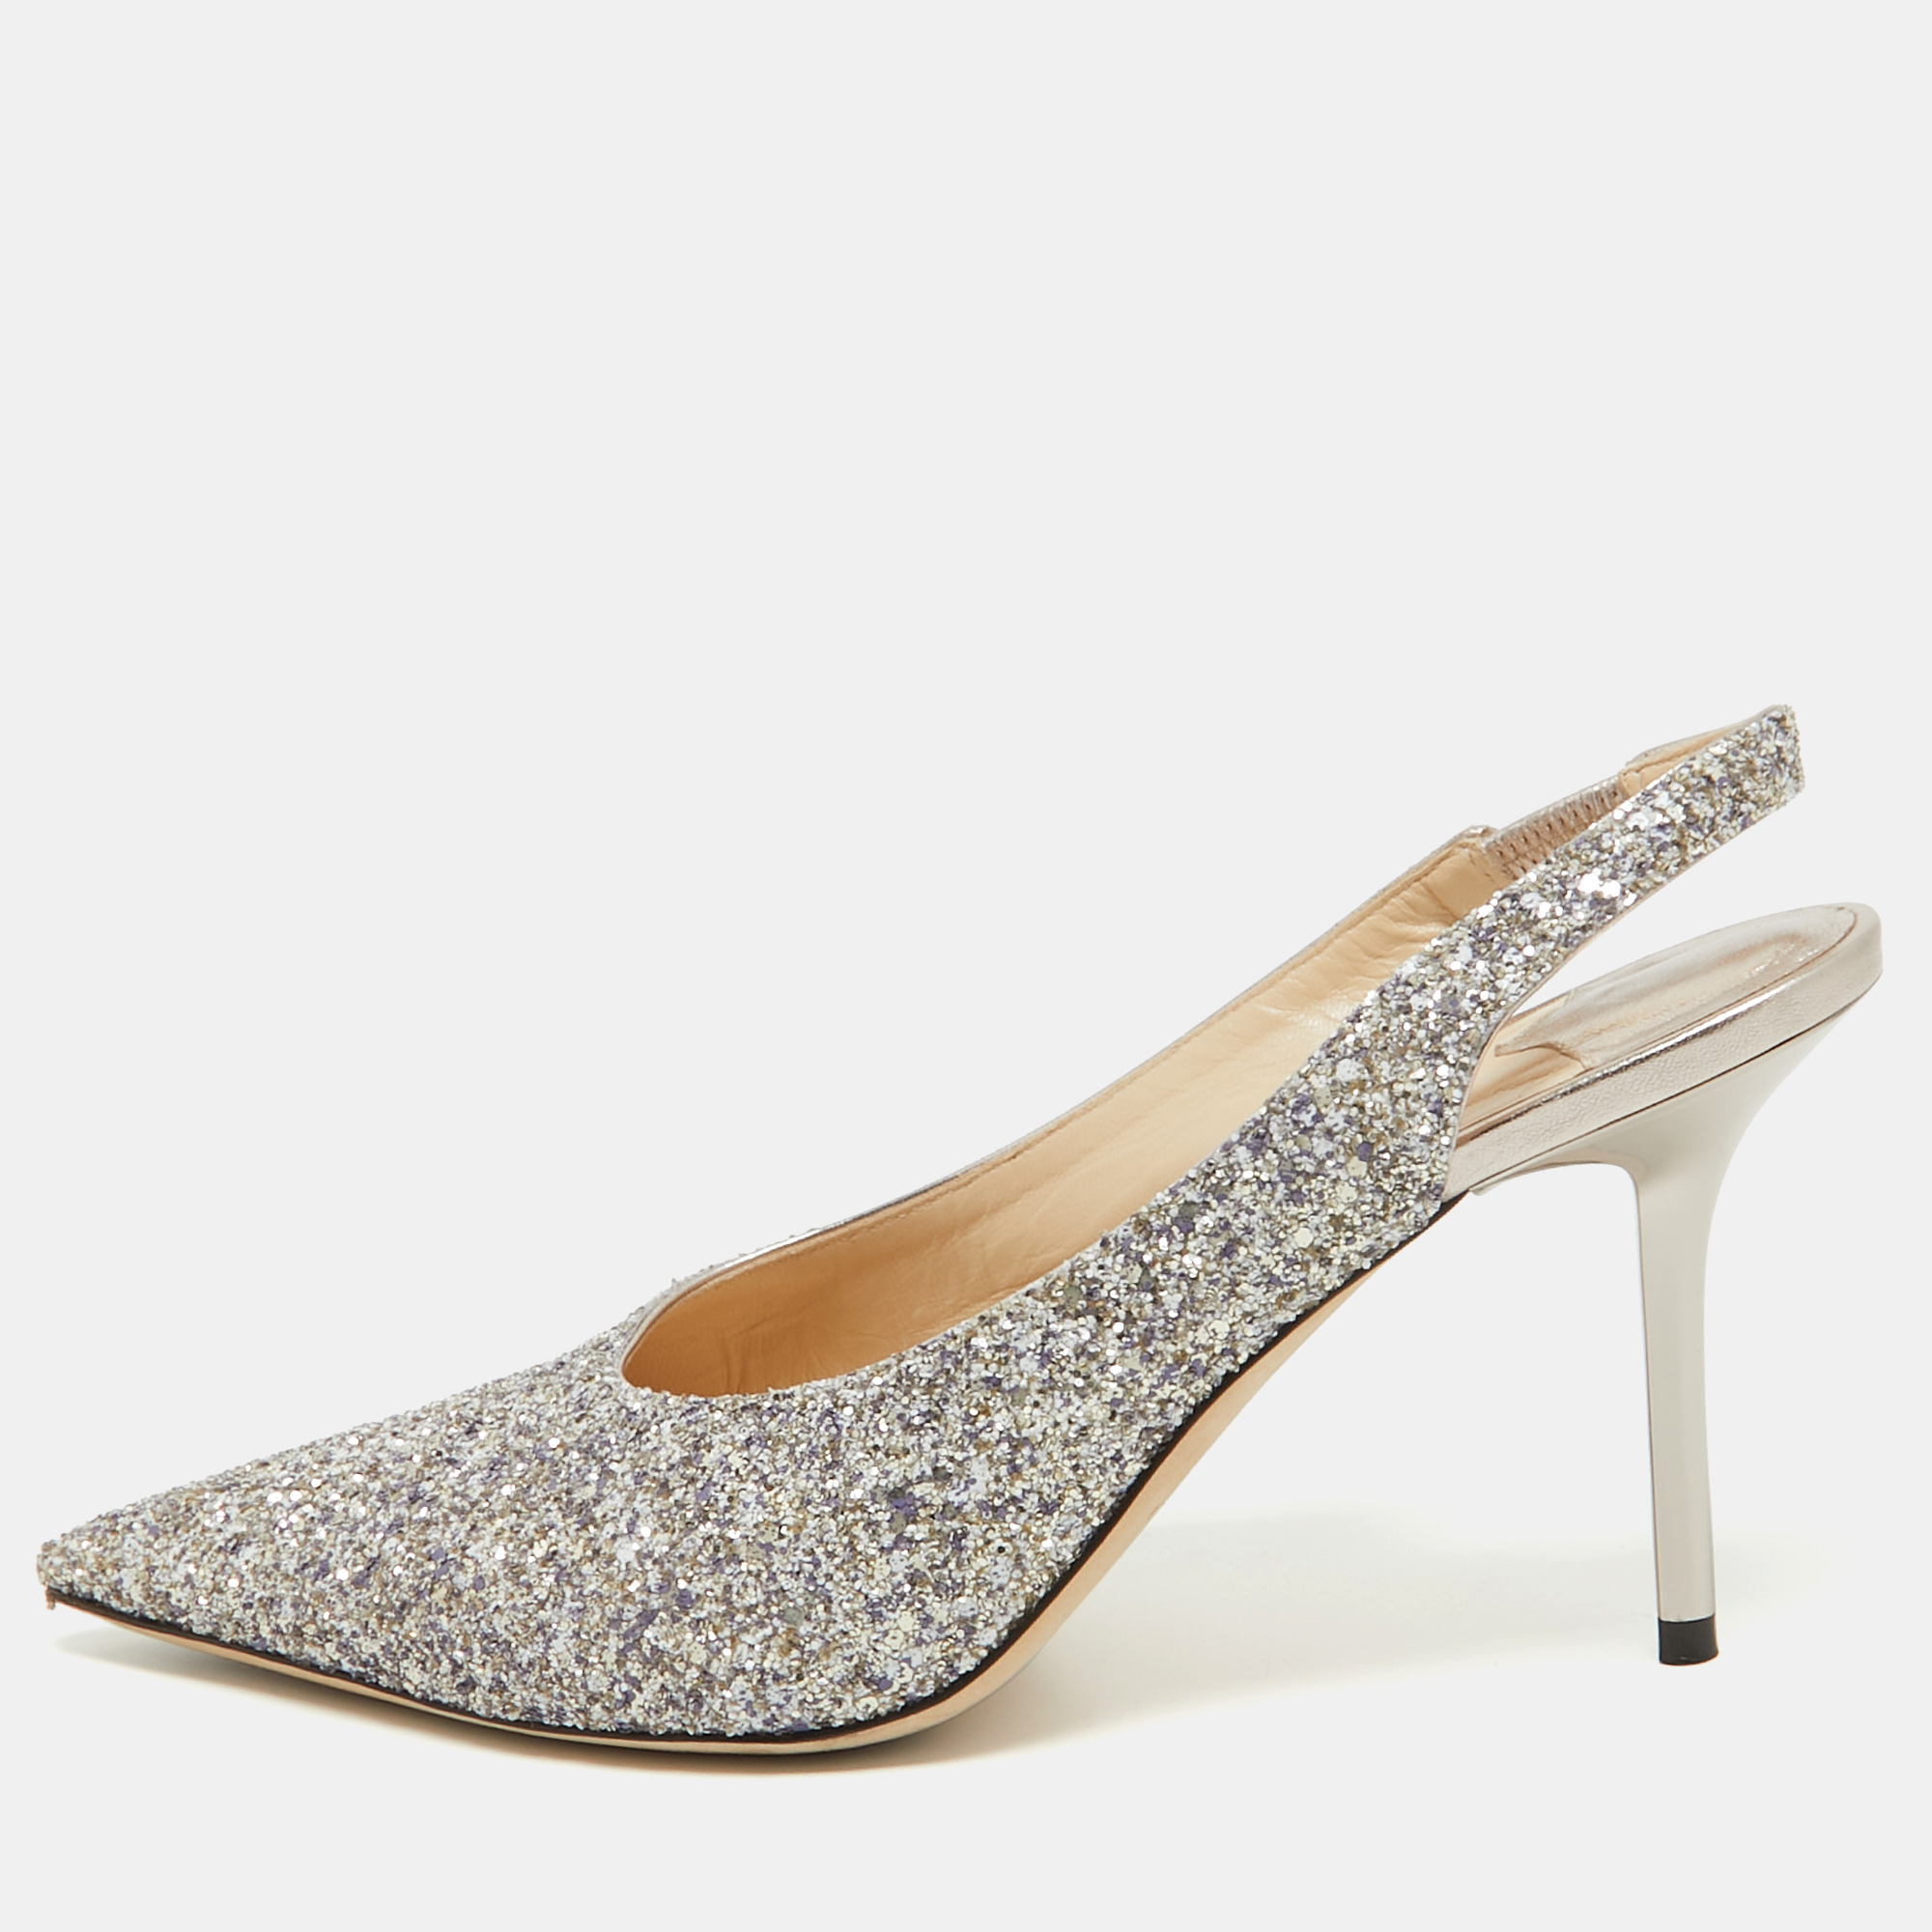 Pre-owned Jimmy Choo Metallic Glitter Ivy Pointed Toe Slingback Pumps Size 38